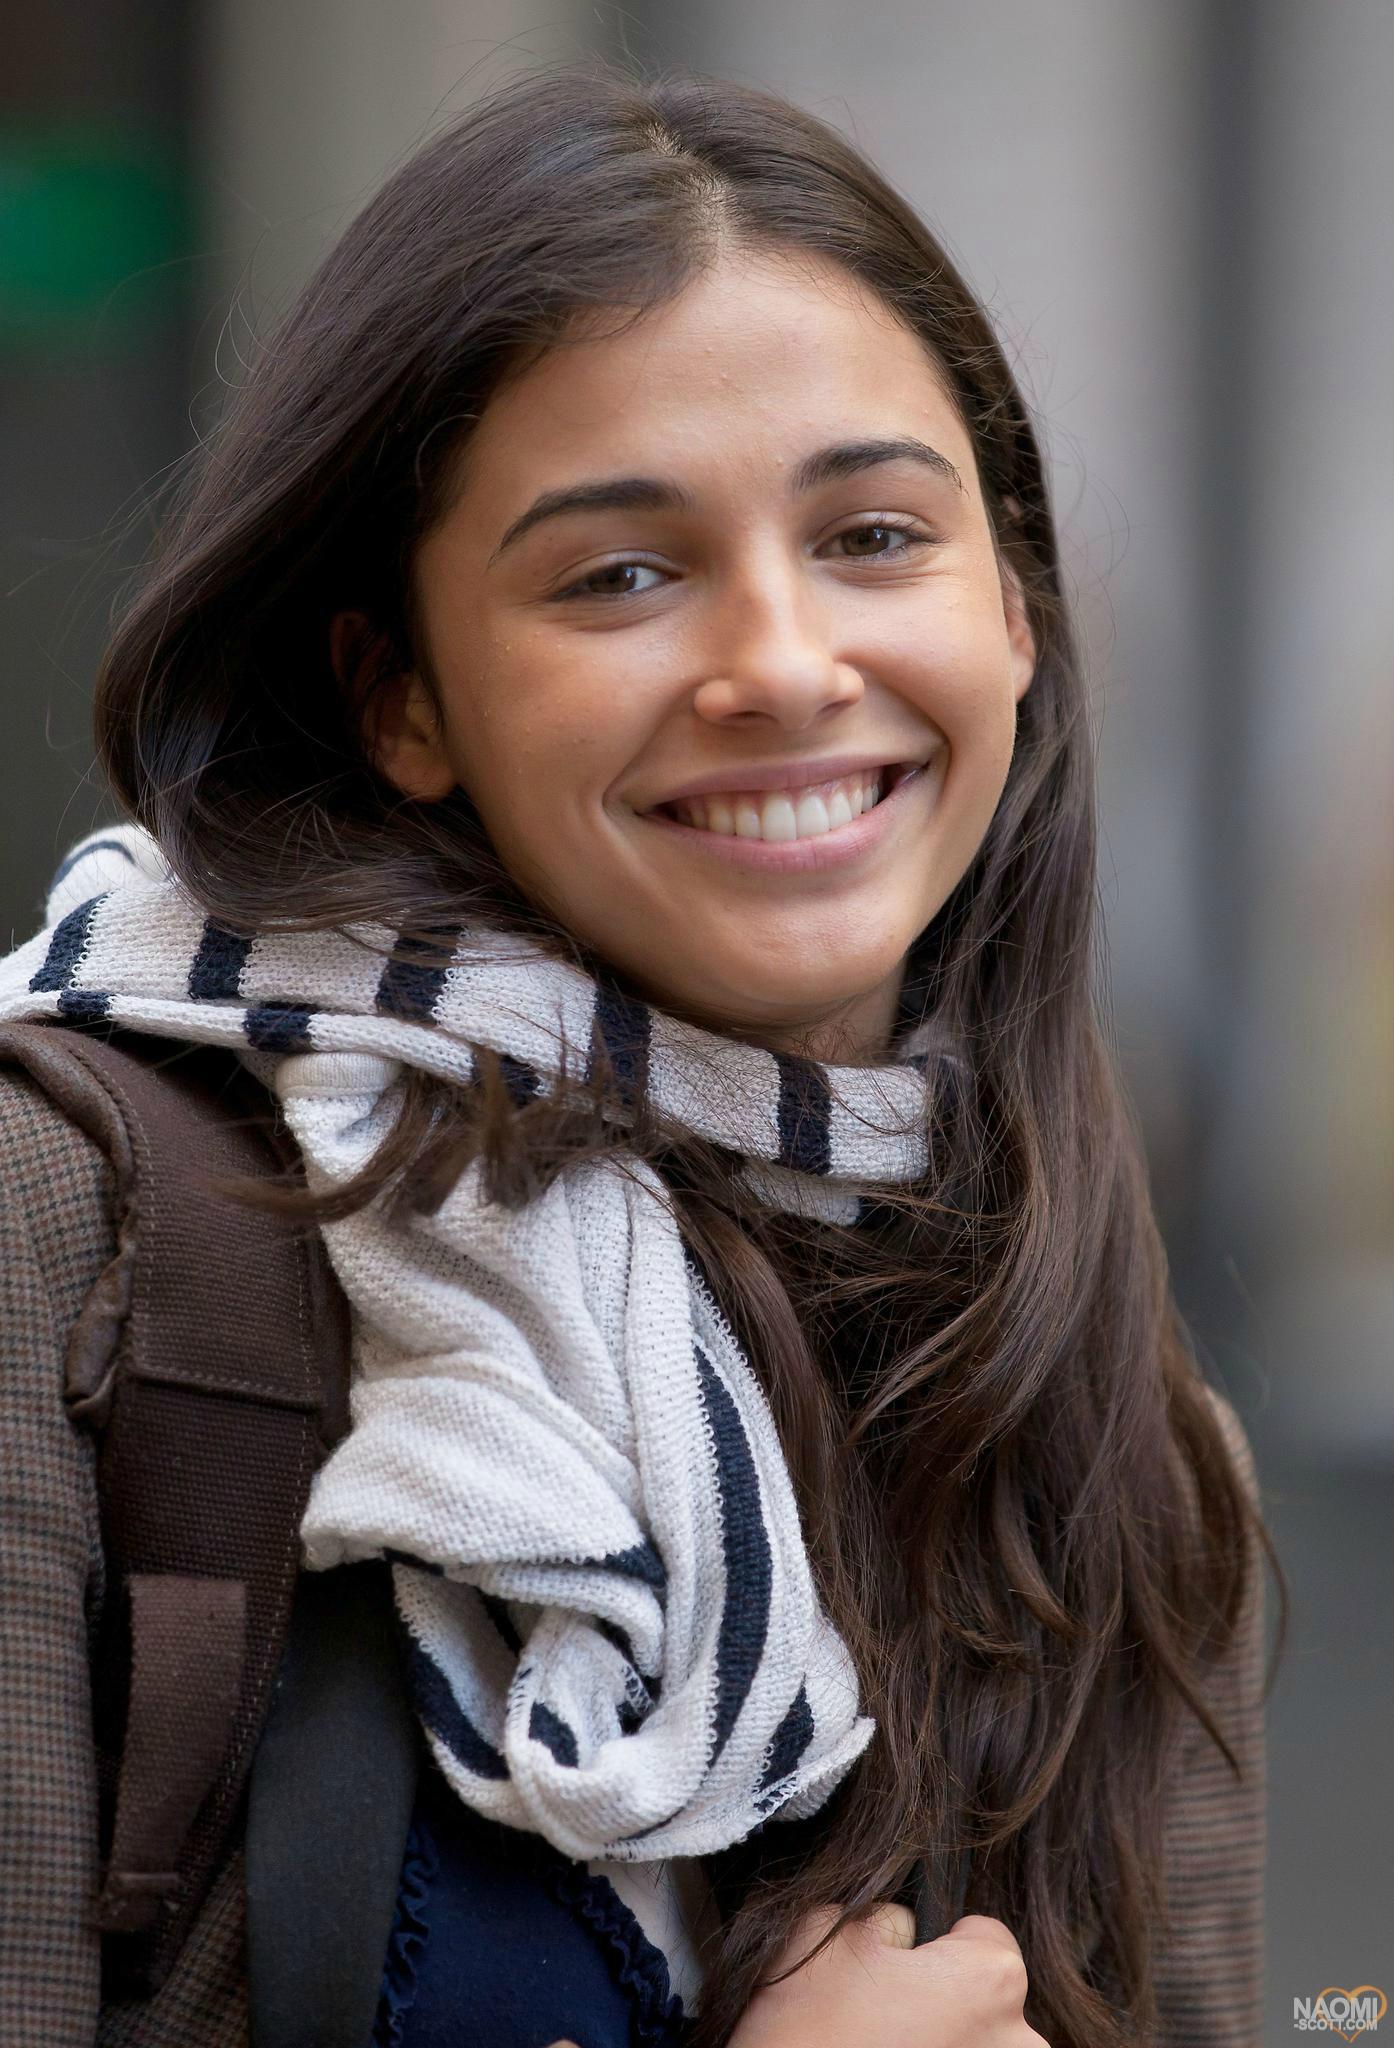 75+ Hot Pictures Of Naomi Scott – Pink Ranger In Power Rangers Movie | Best Of Comic Books